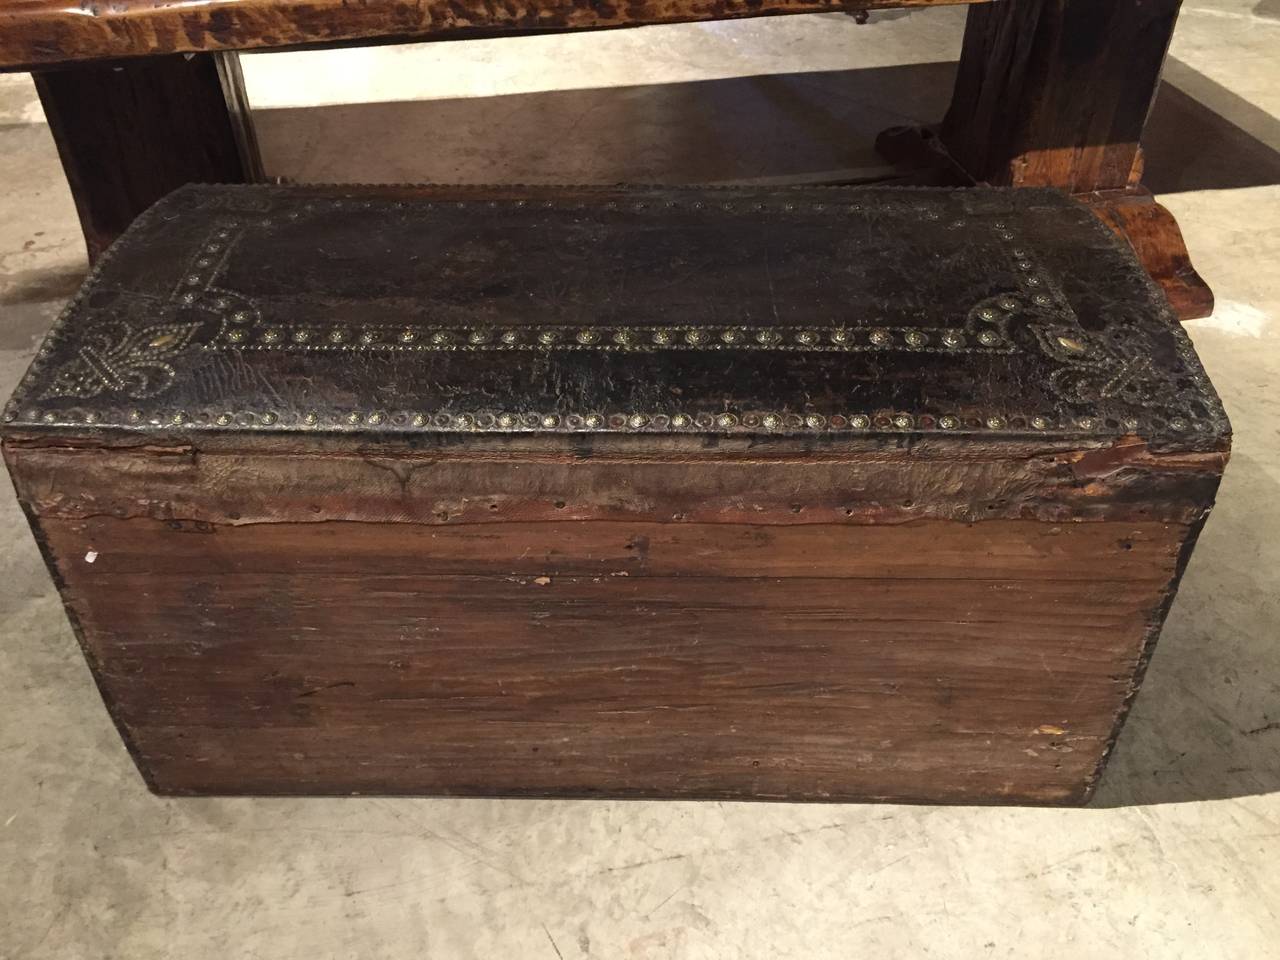 Trunks are one of the oldest types of furniture still in existence today. They can be found dating back many centuries and come in various styles and shapes. This piece is a very nice example of a French 